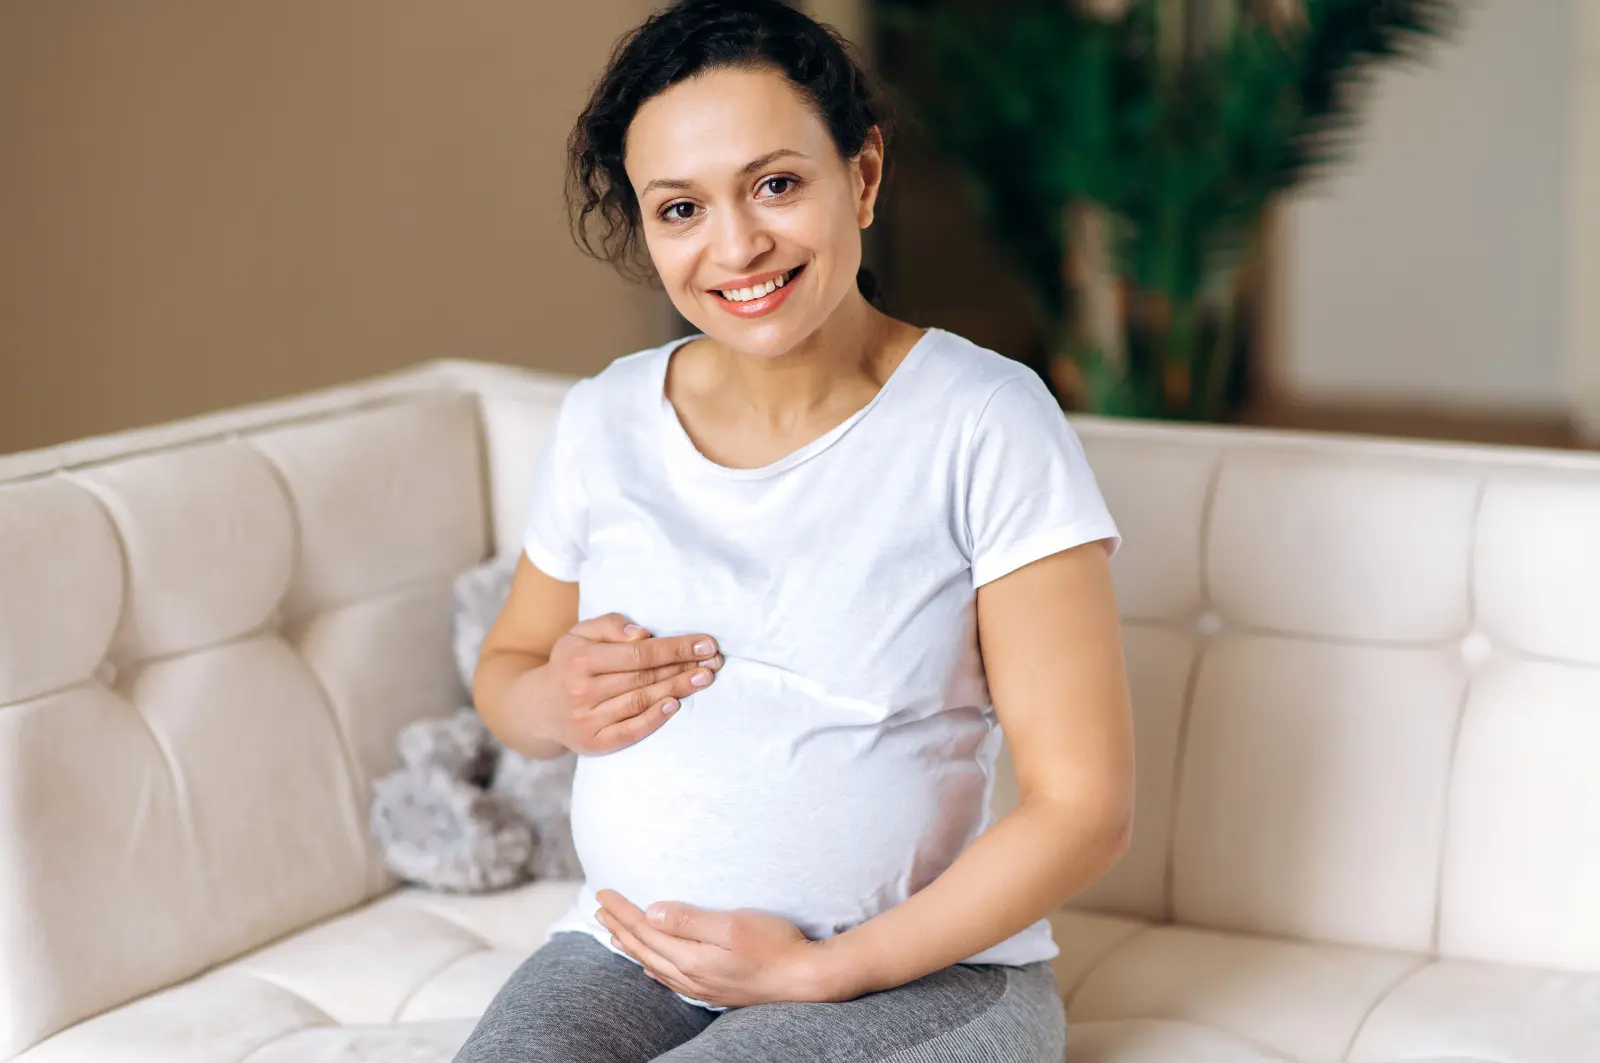 selecting Baby's Adoptive Family smiling woman holding pregnant-belly